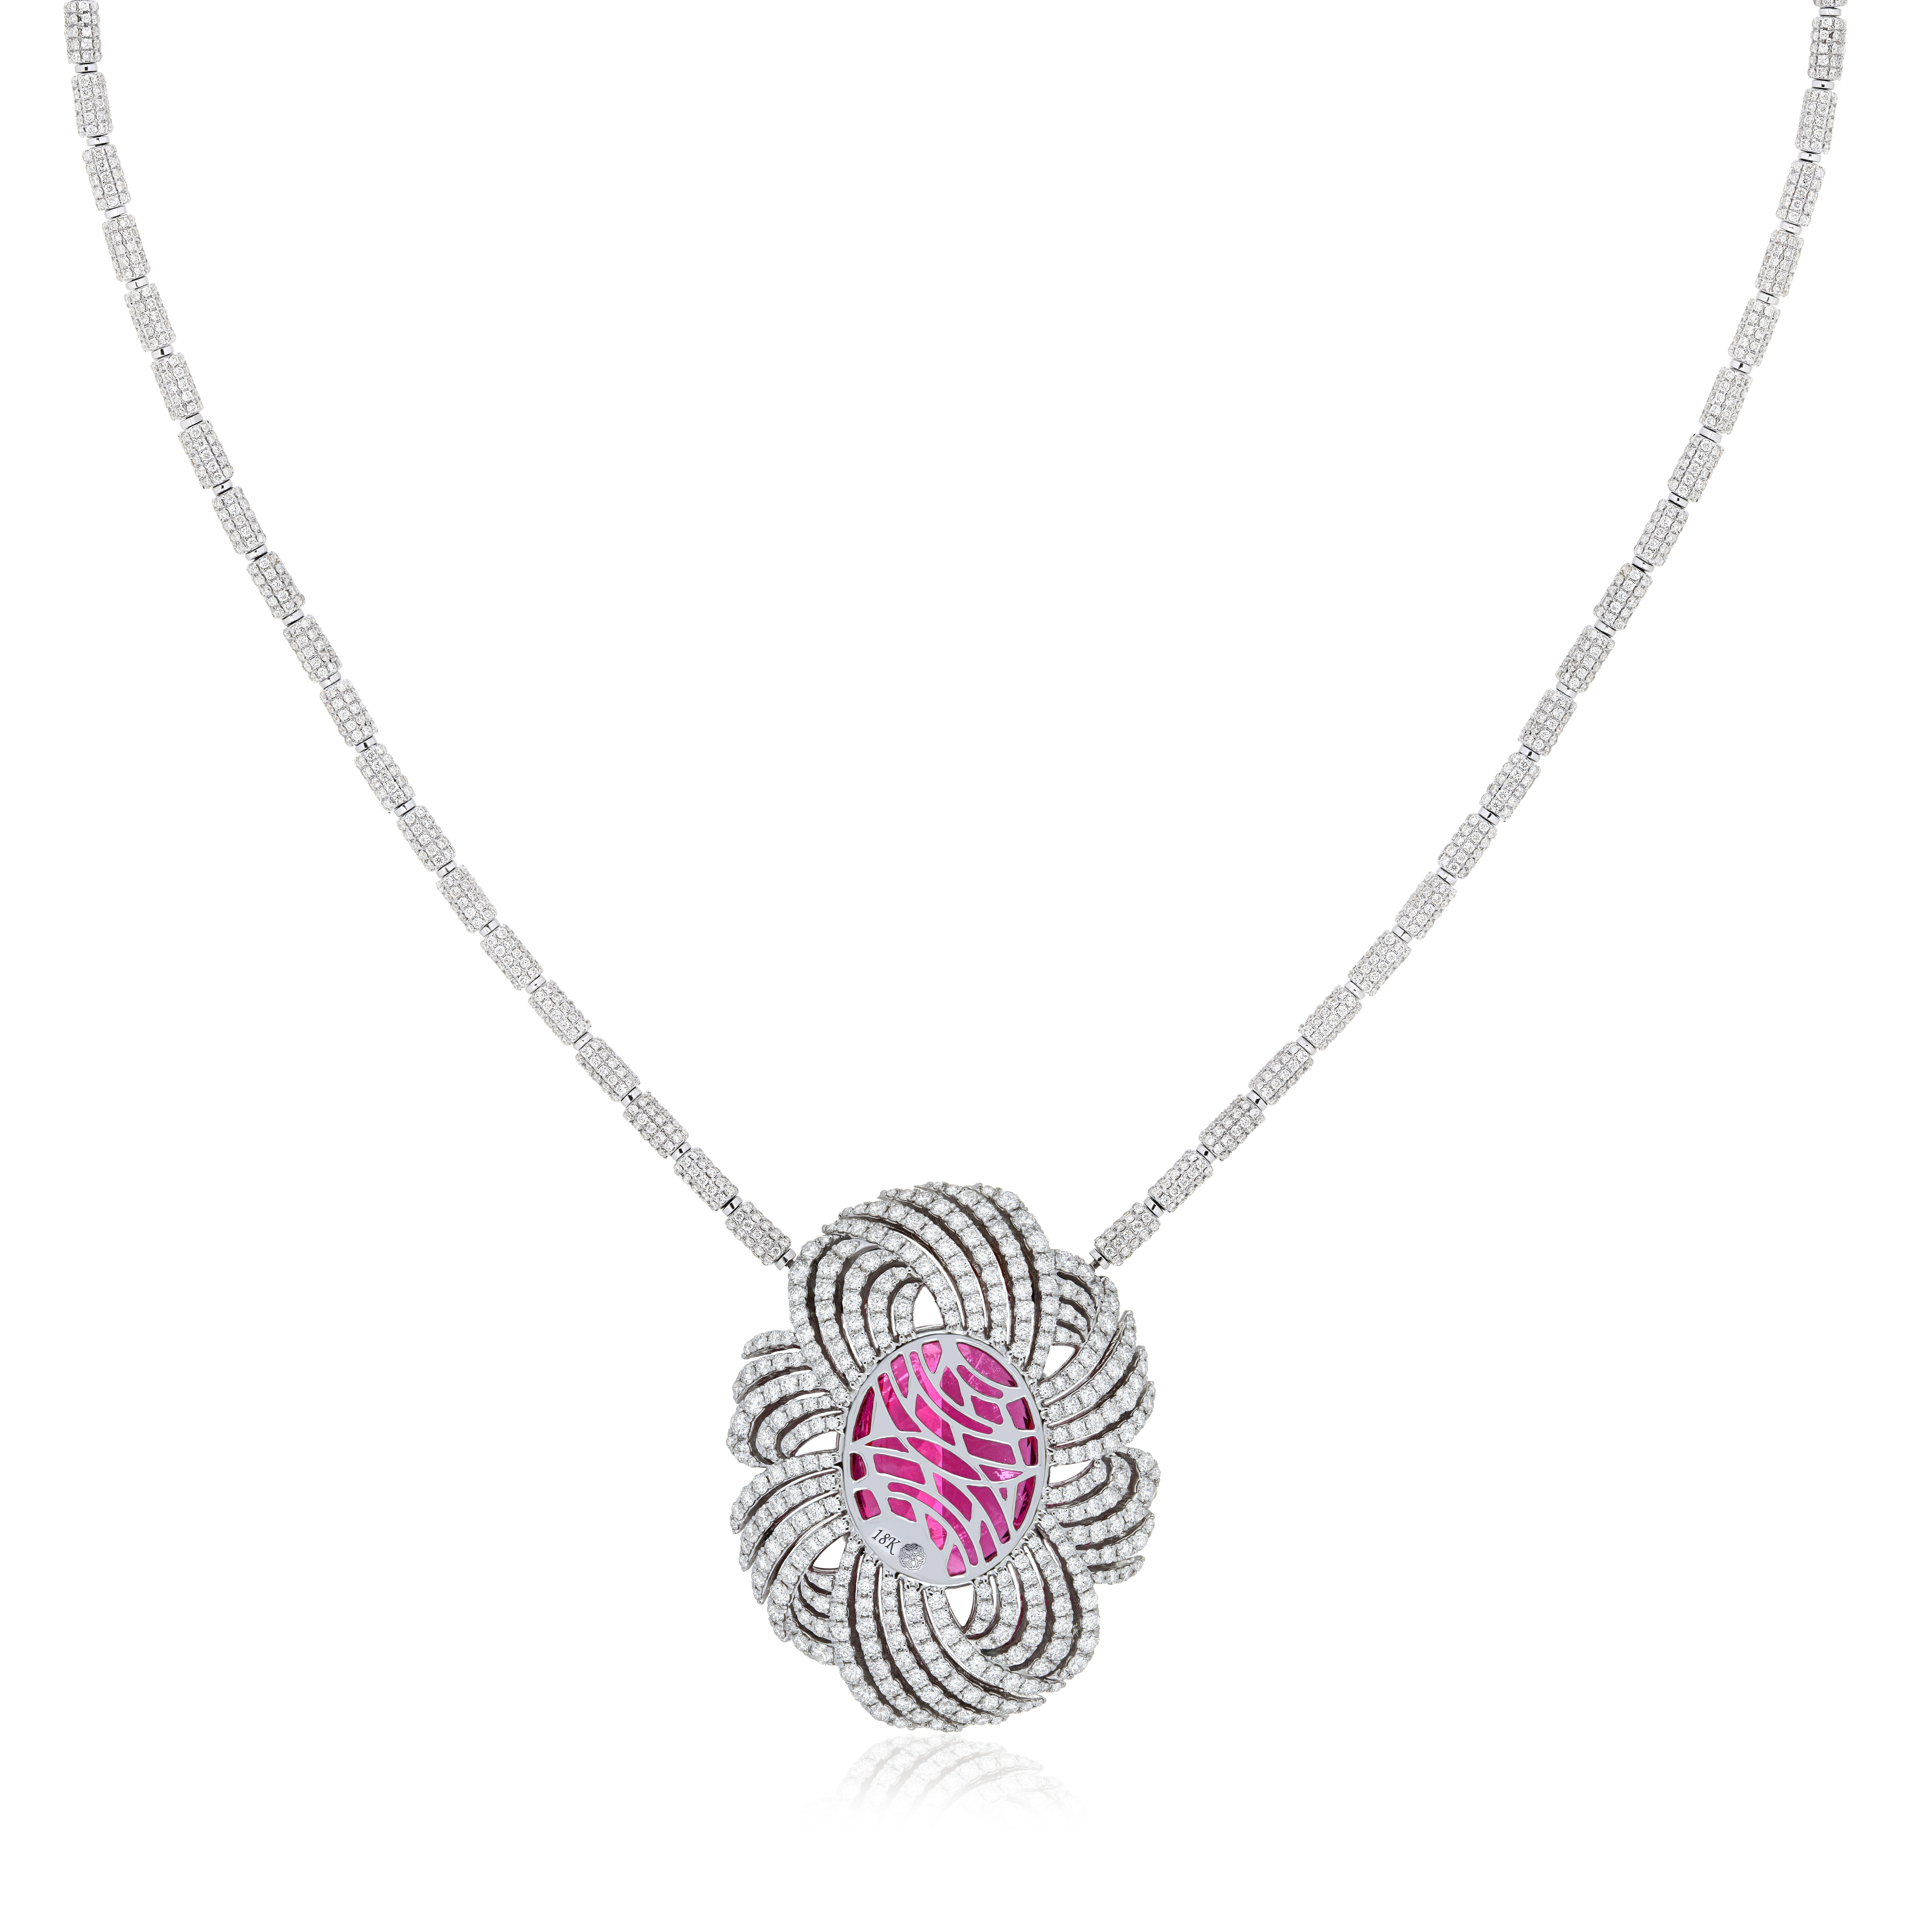 Women's One of a Kind 22 Carat Rubellite and Diamond Necklace in 18K White Gold For Sale